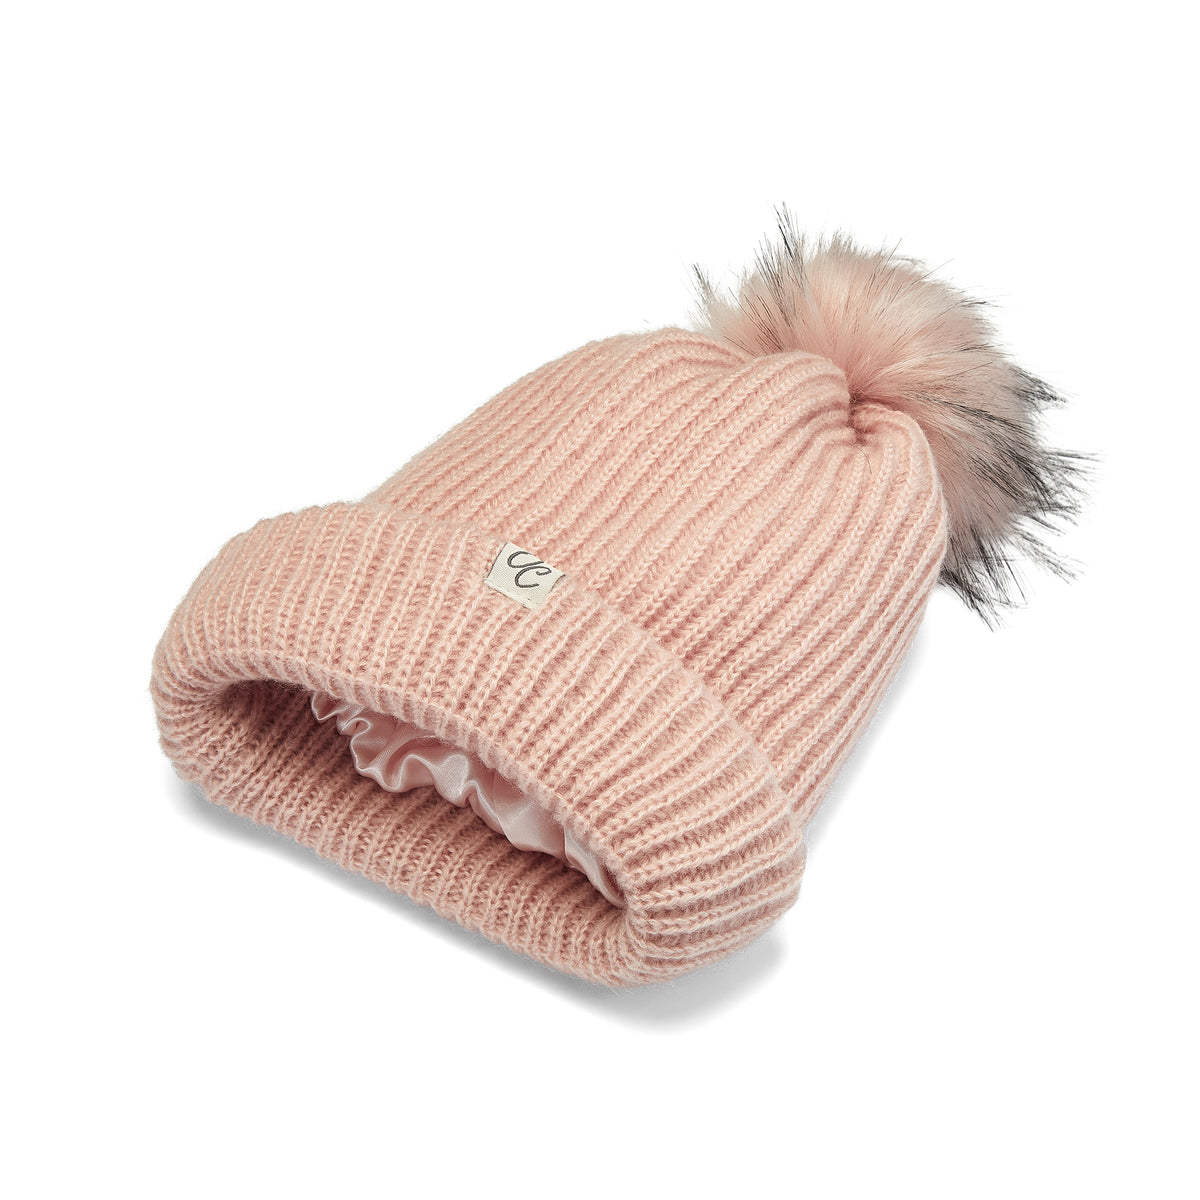 Only Curls Pink Satin Lined Knitted Beanie Hat with pom pom and showing the lining